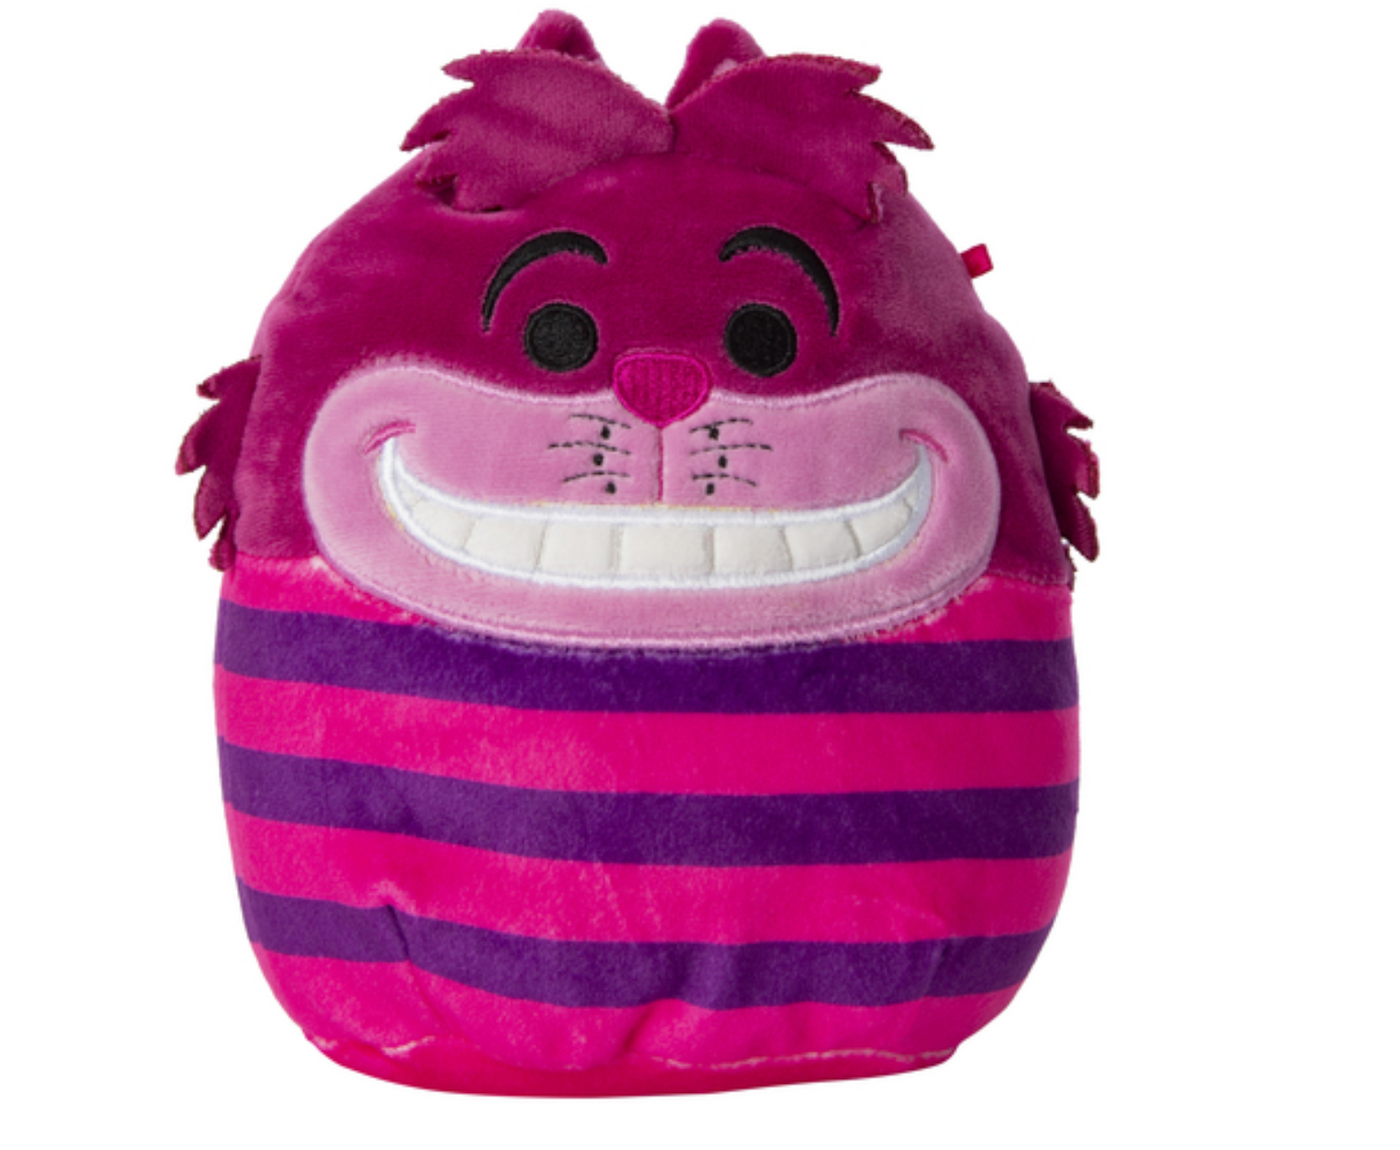 Disney Squishmallows 6.5inc Alice in Wonderland Cheshire Cat Plush New with Tag